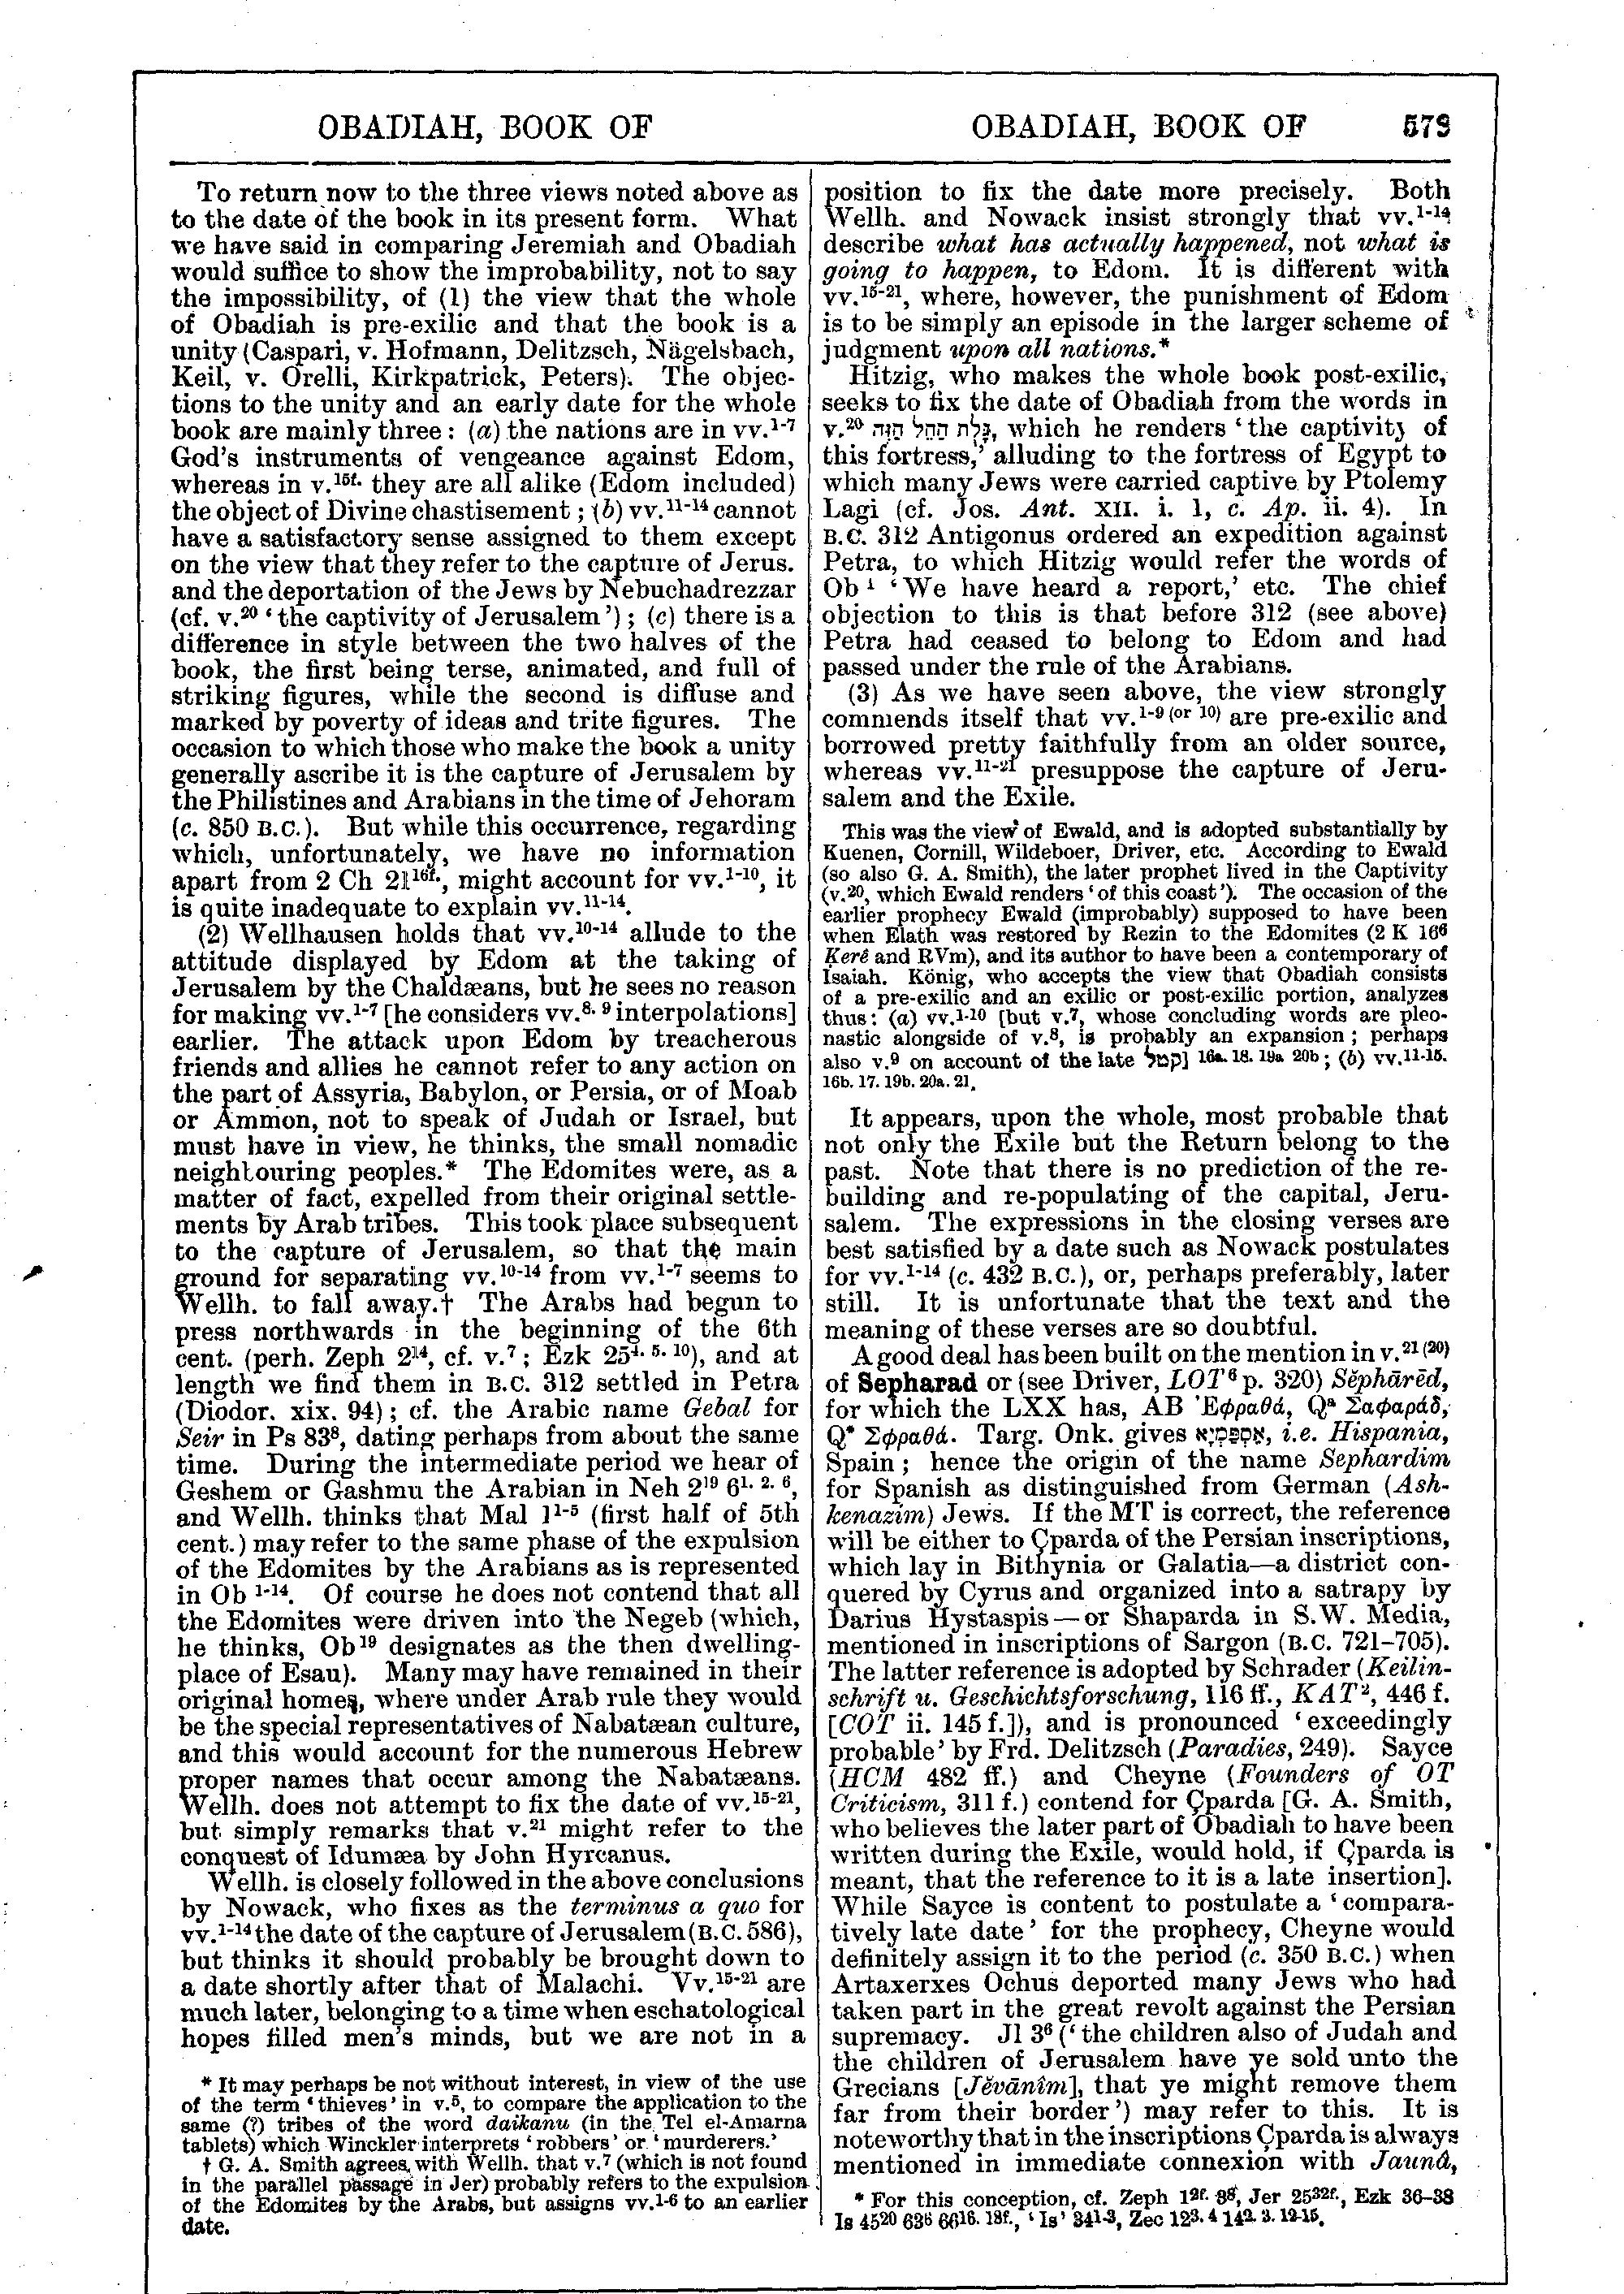 Image of page 579